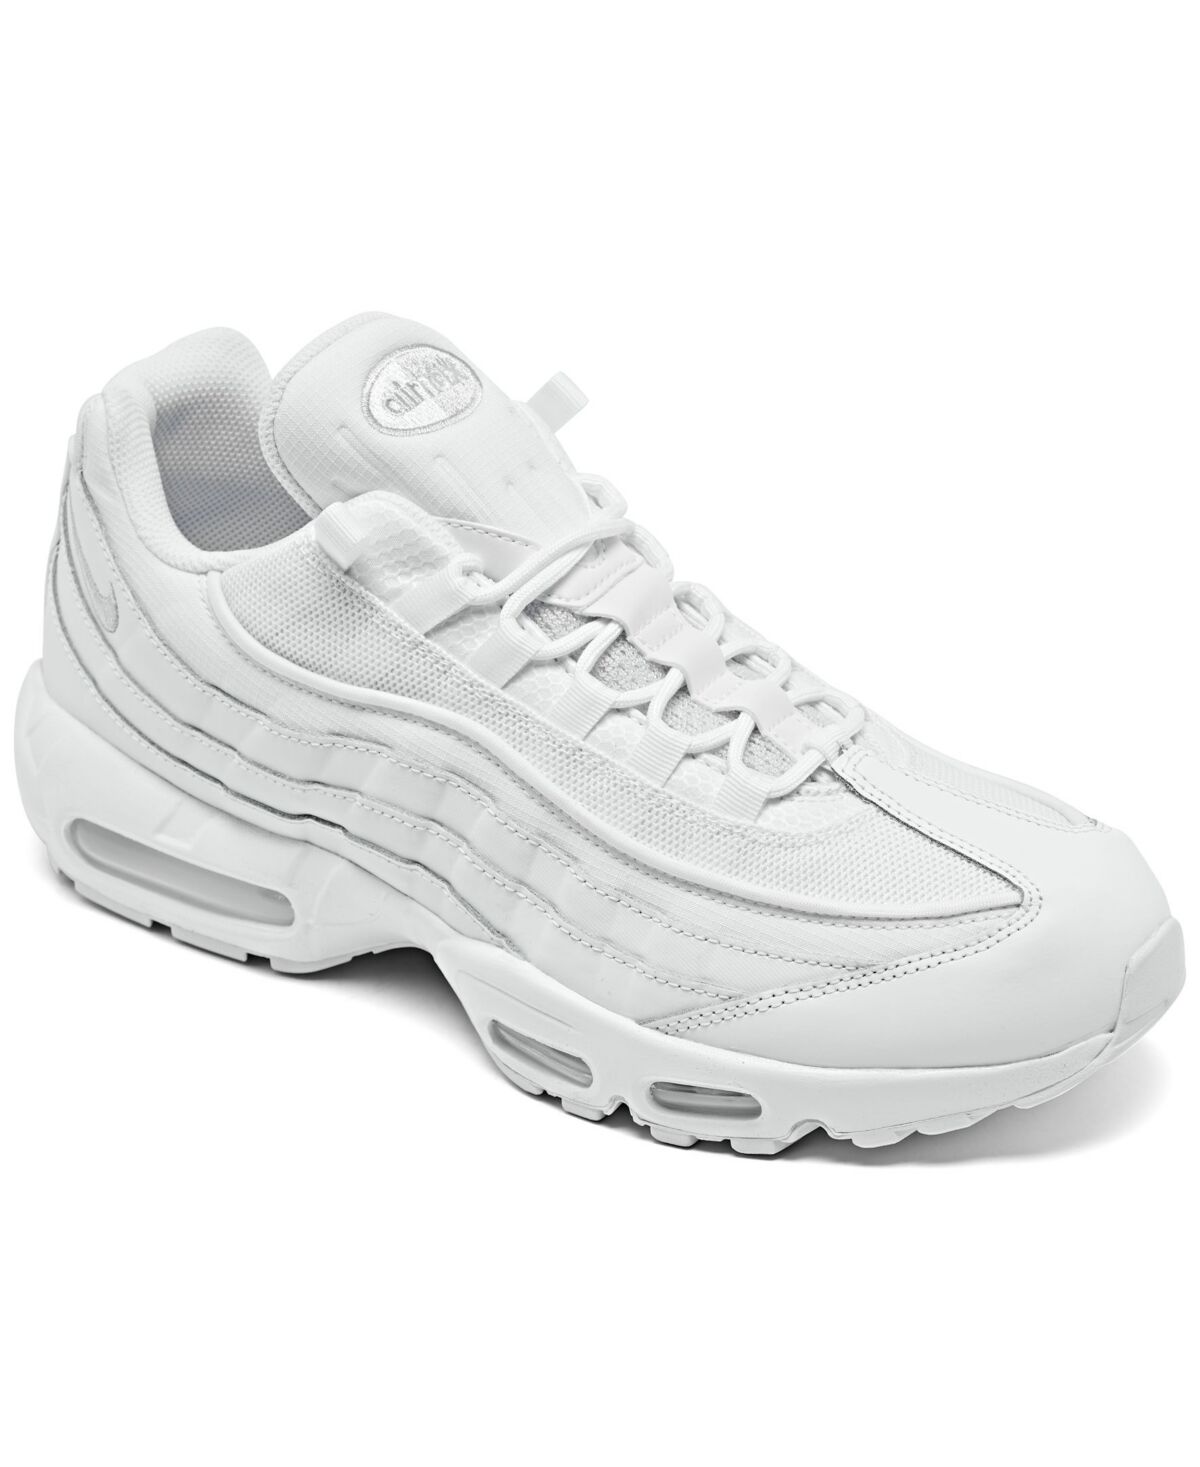 Nike Men's Air Max 95 Essential Casual Sneakers from Finish Line - White